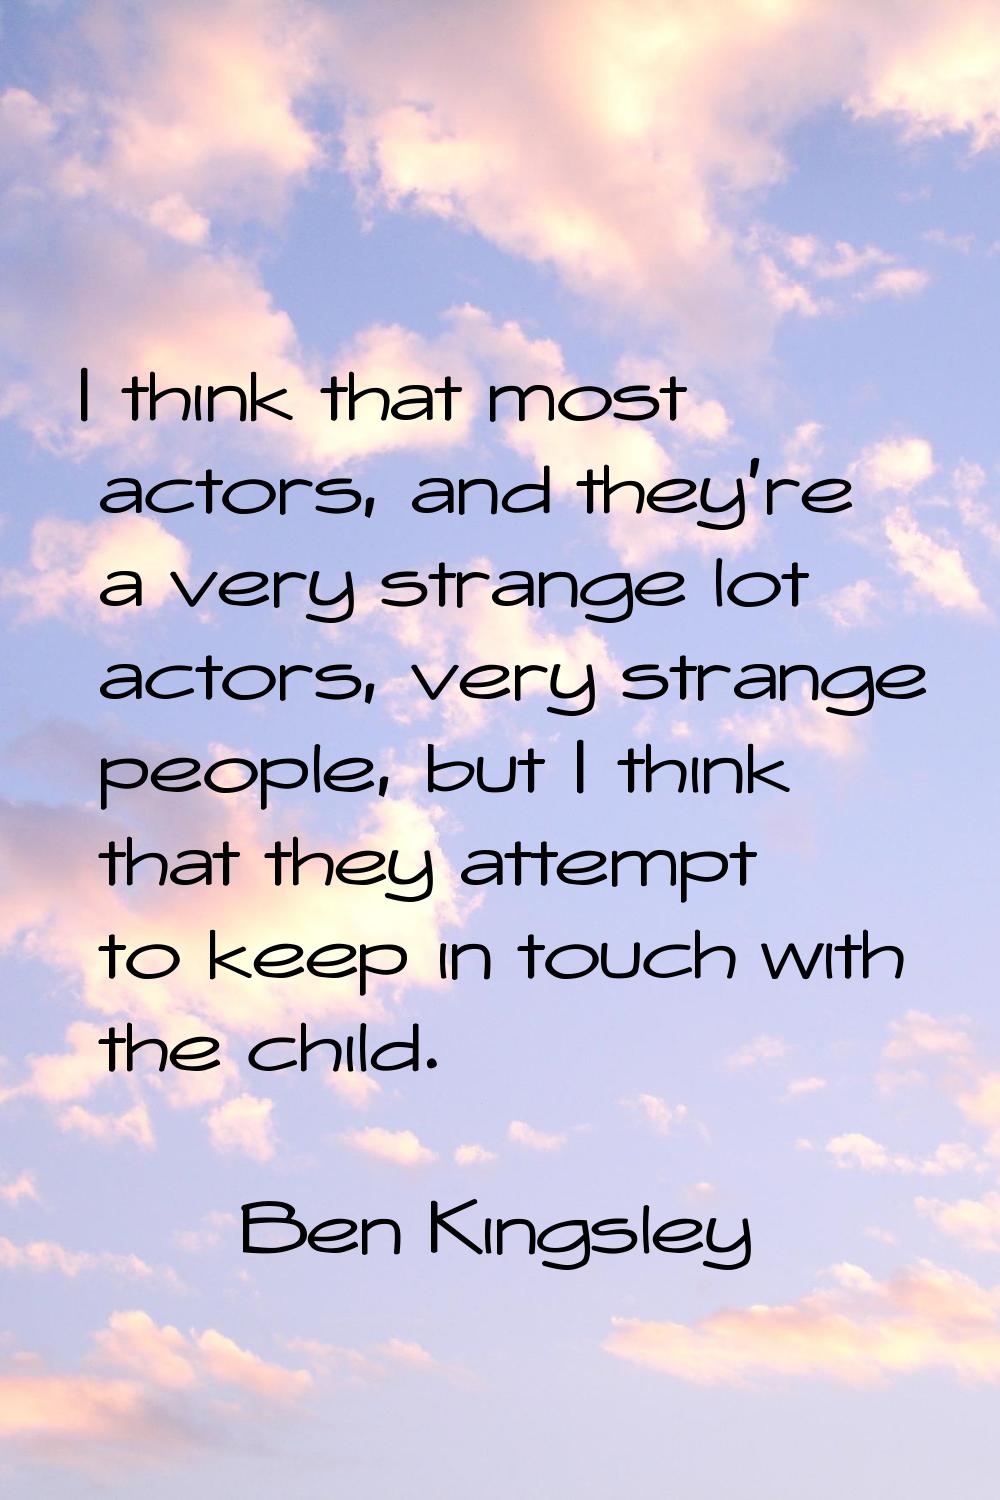 I think that most actors, and they're a very strange lot actors, very strange people, but I think t